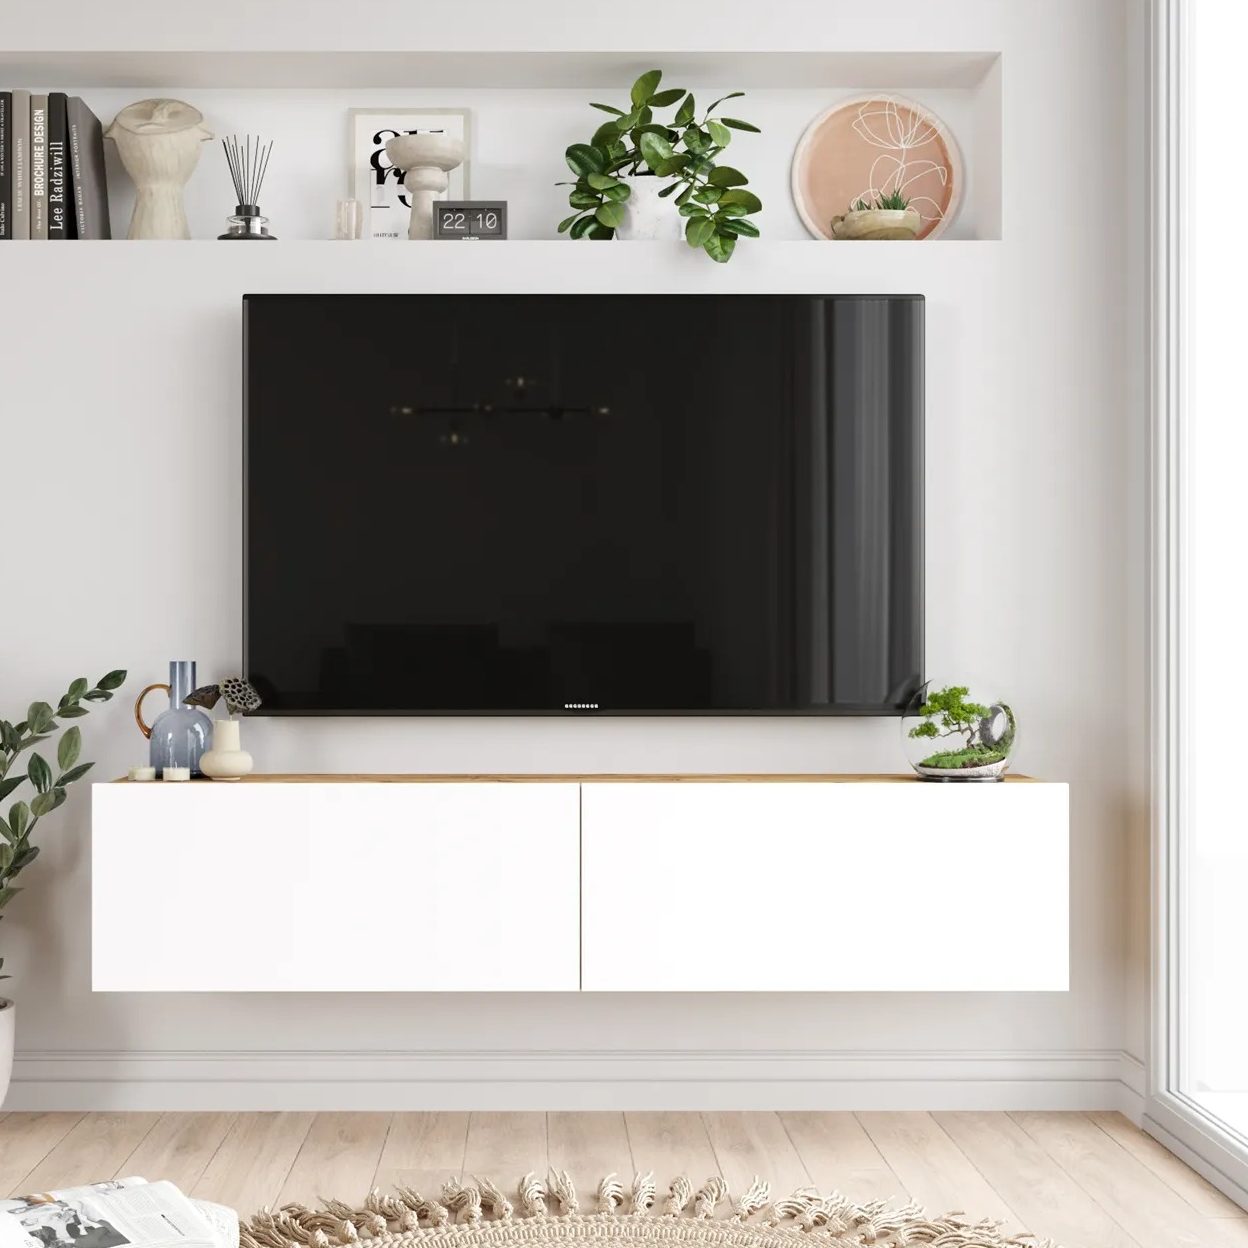 lineær sweater Meget sur Future White & Oak Wall Mounted TV Stand with 2 Drop Down Doors, White  Media Stand, Modern TV Stand - Traditional Turk